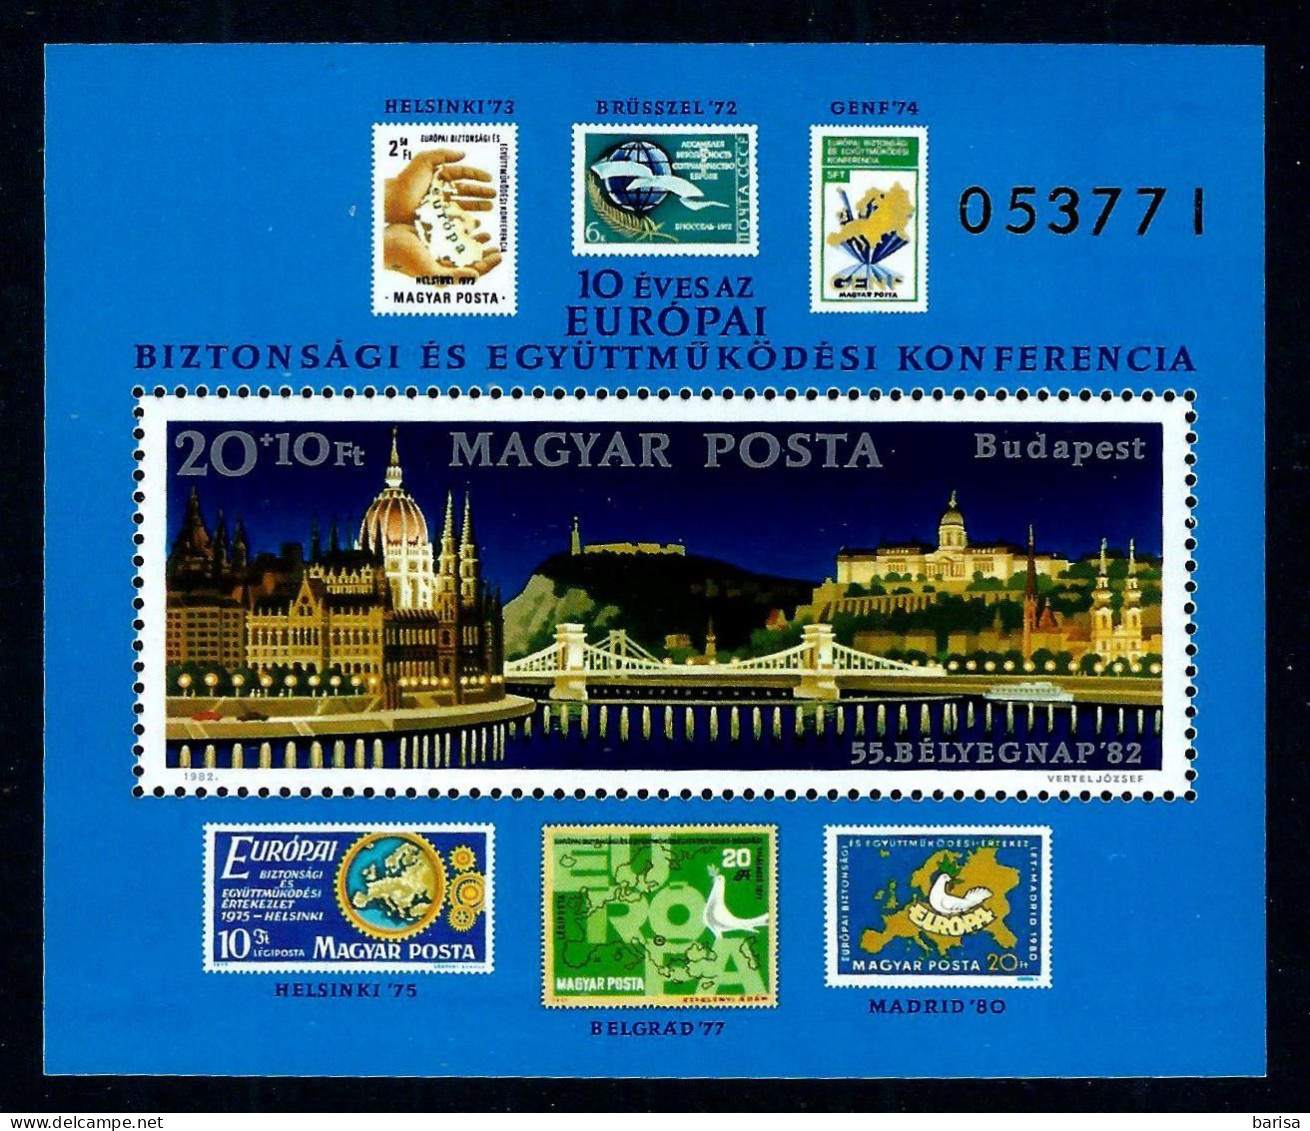 (A6) Hungary 1982: 10 Years Conference On European Security And Cooperation (CSCE) ** (MNH) - Europese Gedachte